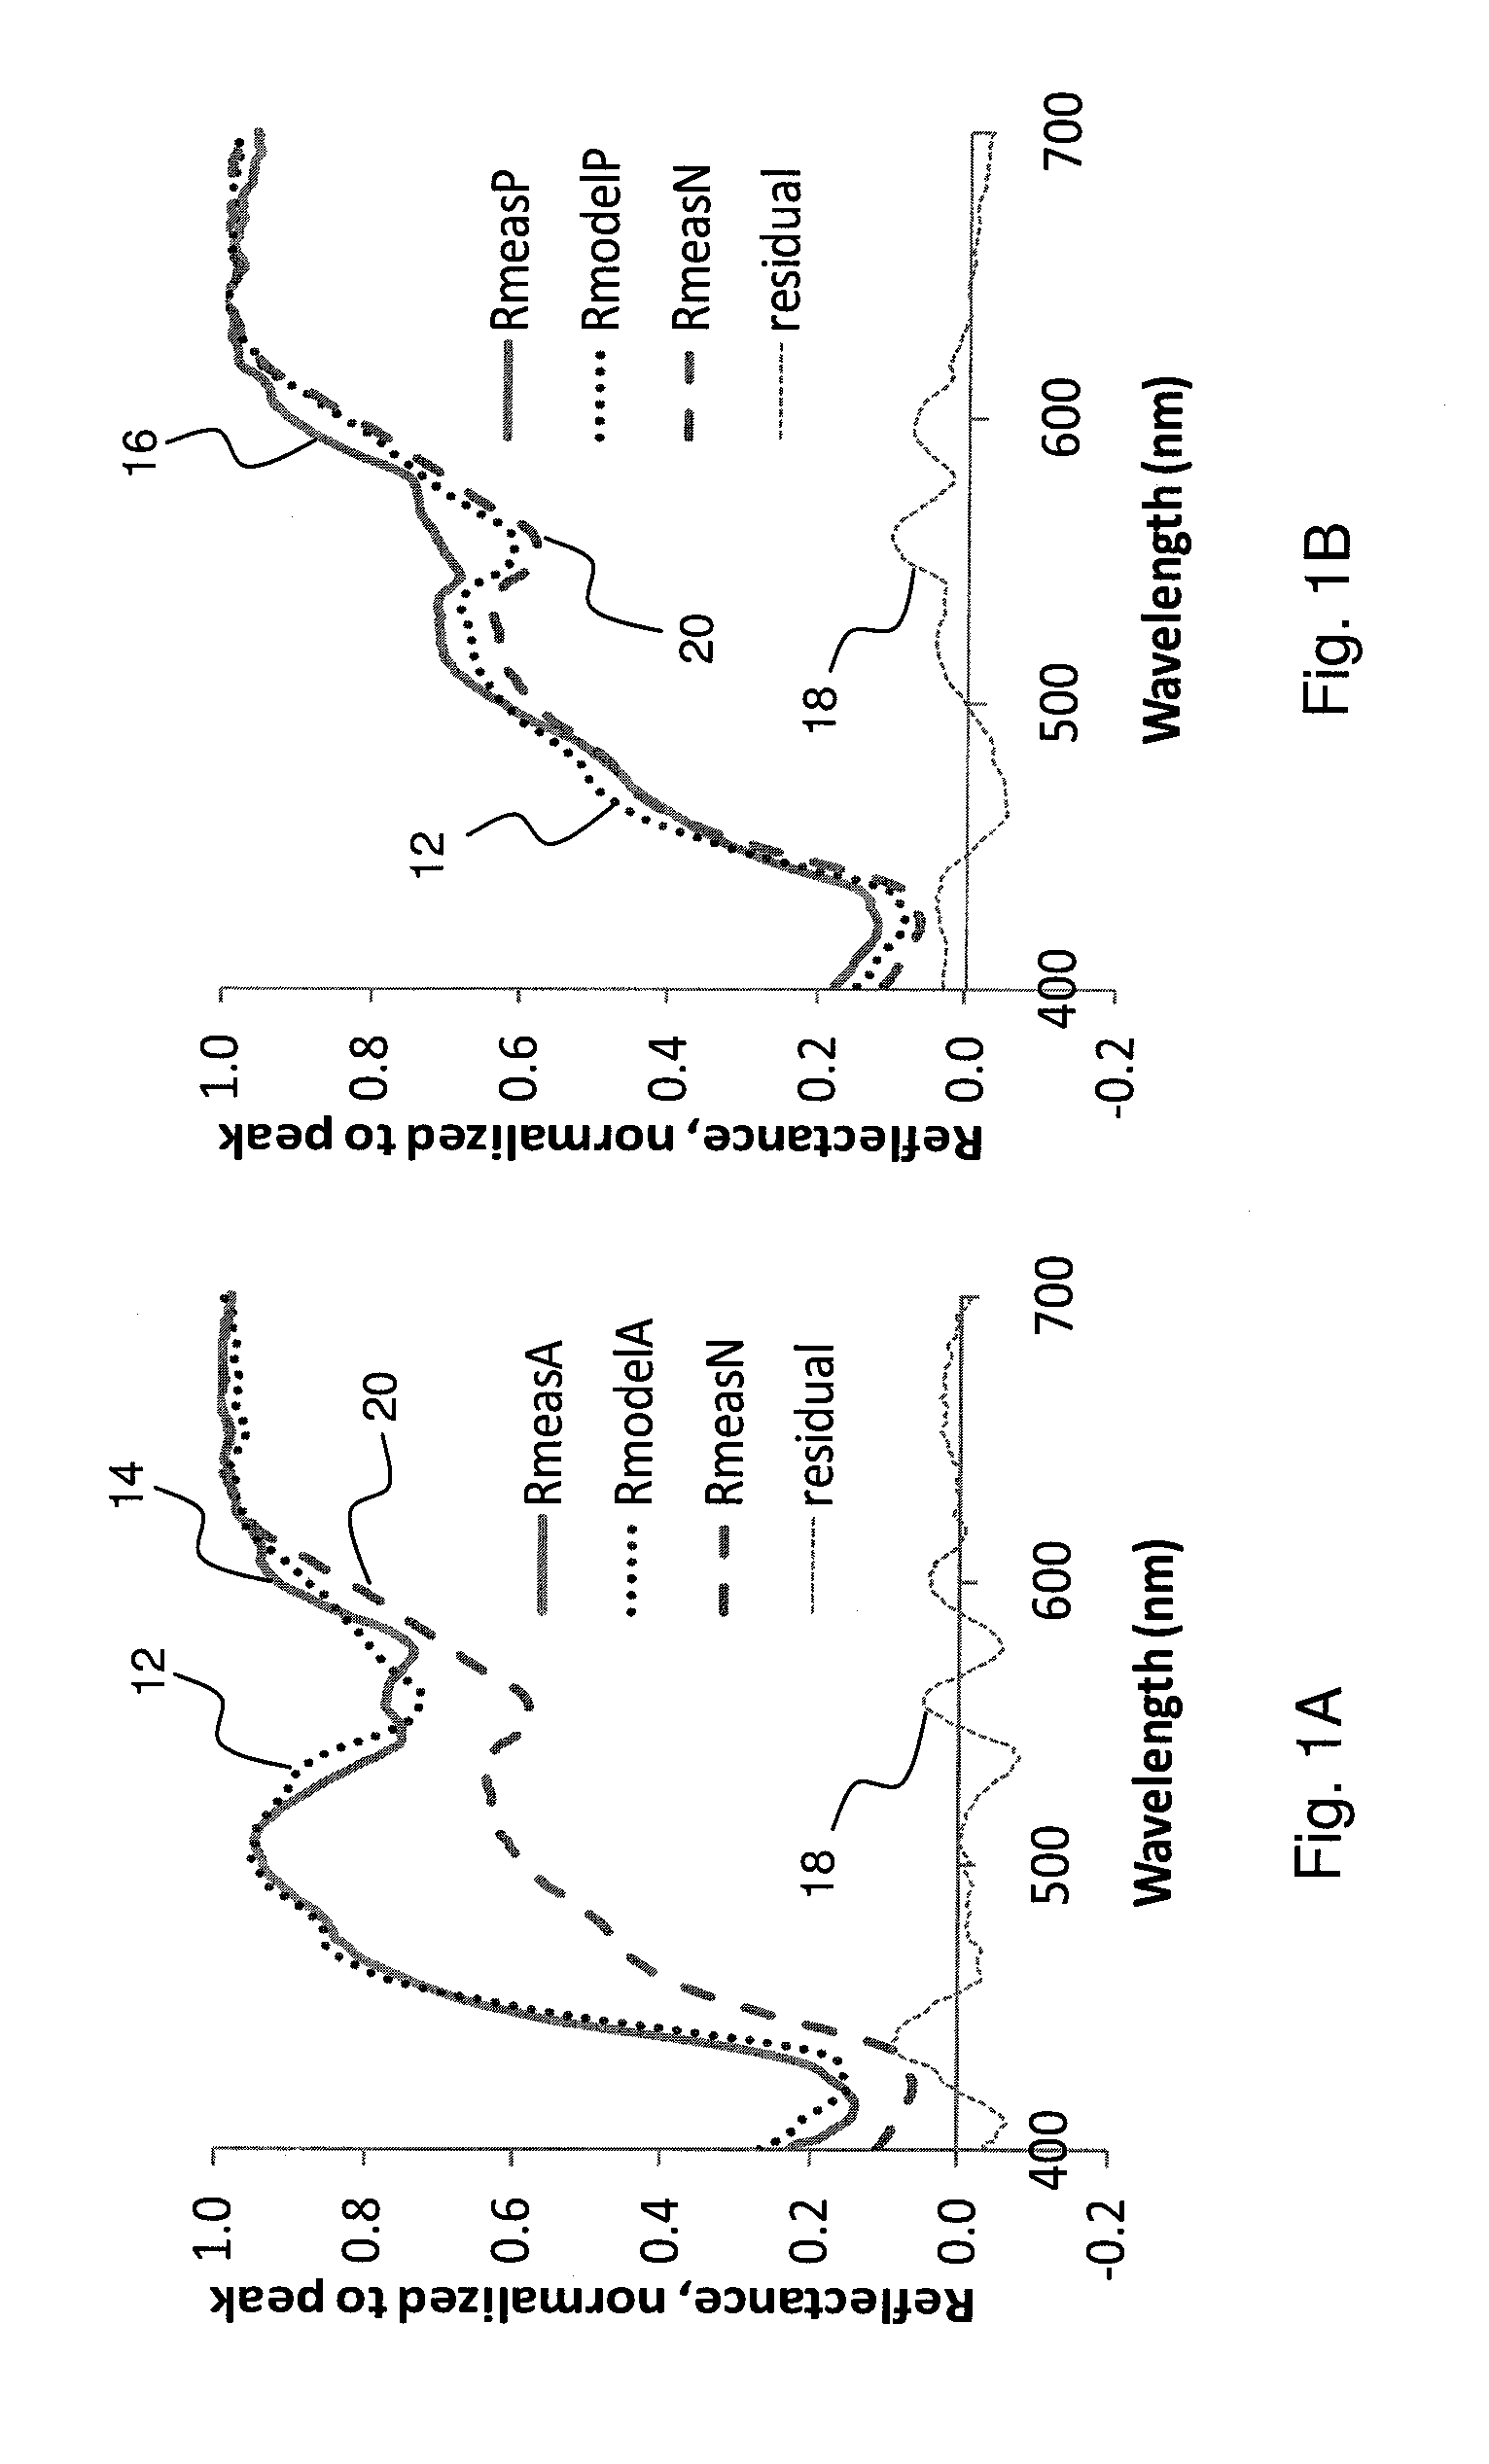 Multimodal Spectroscopic Systems and Methods for Classifying Biological Tissue